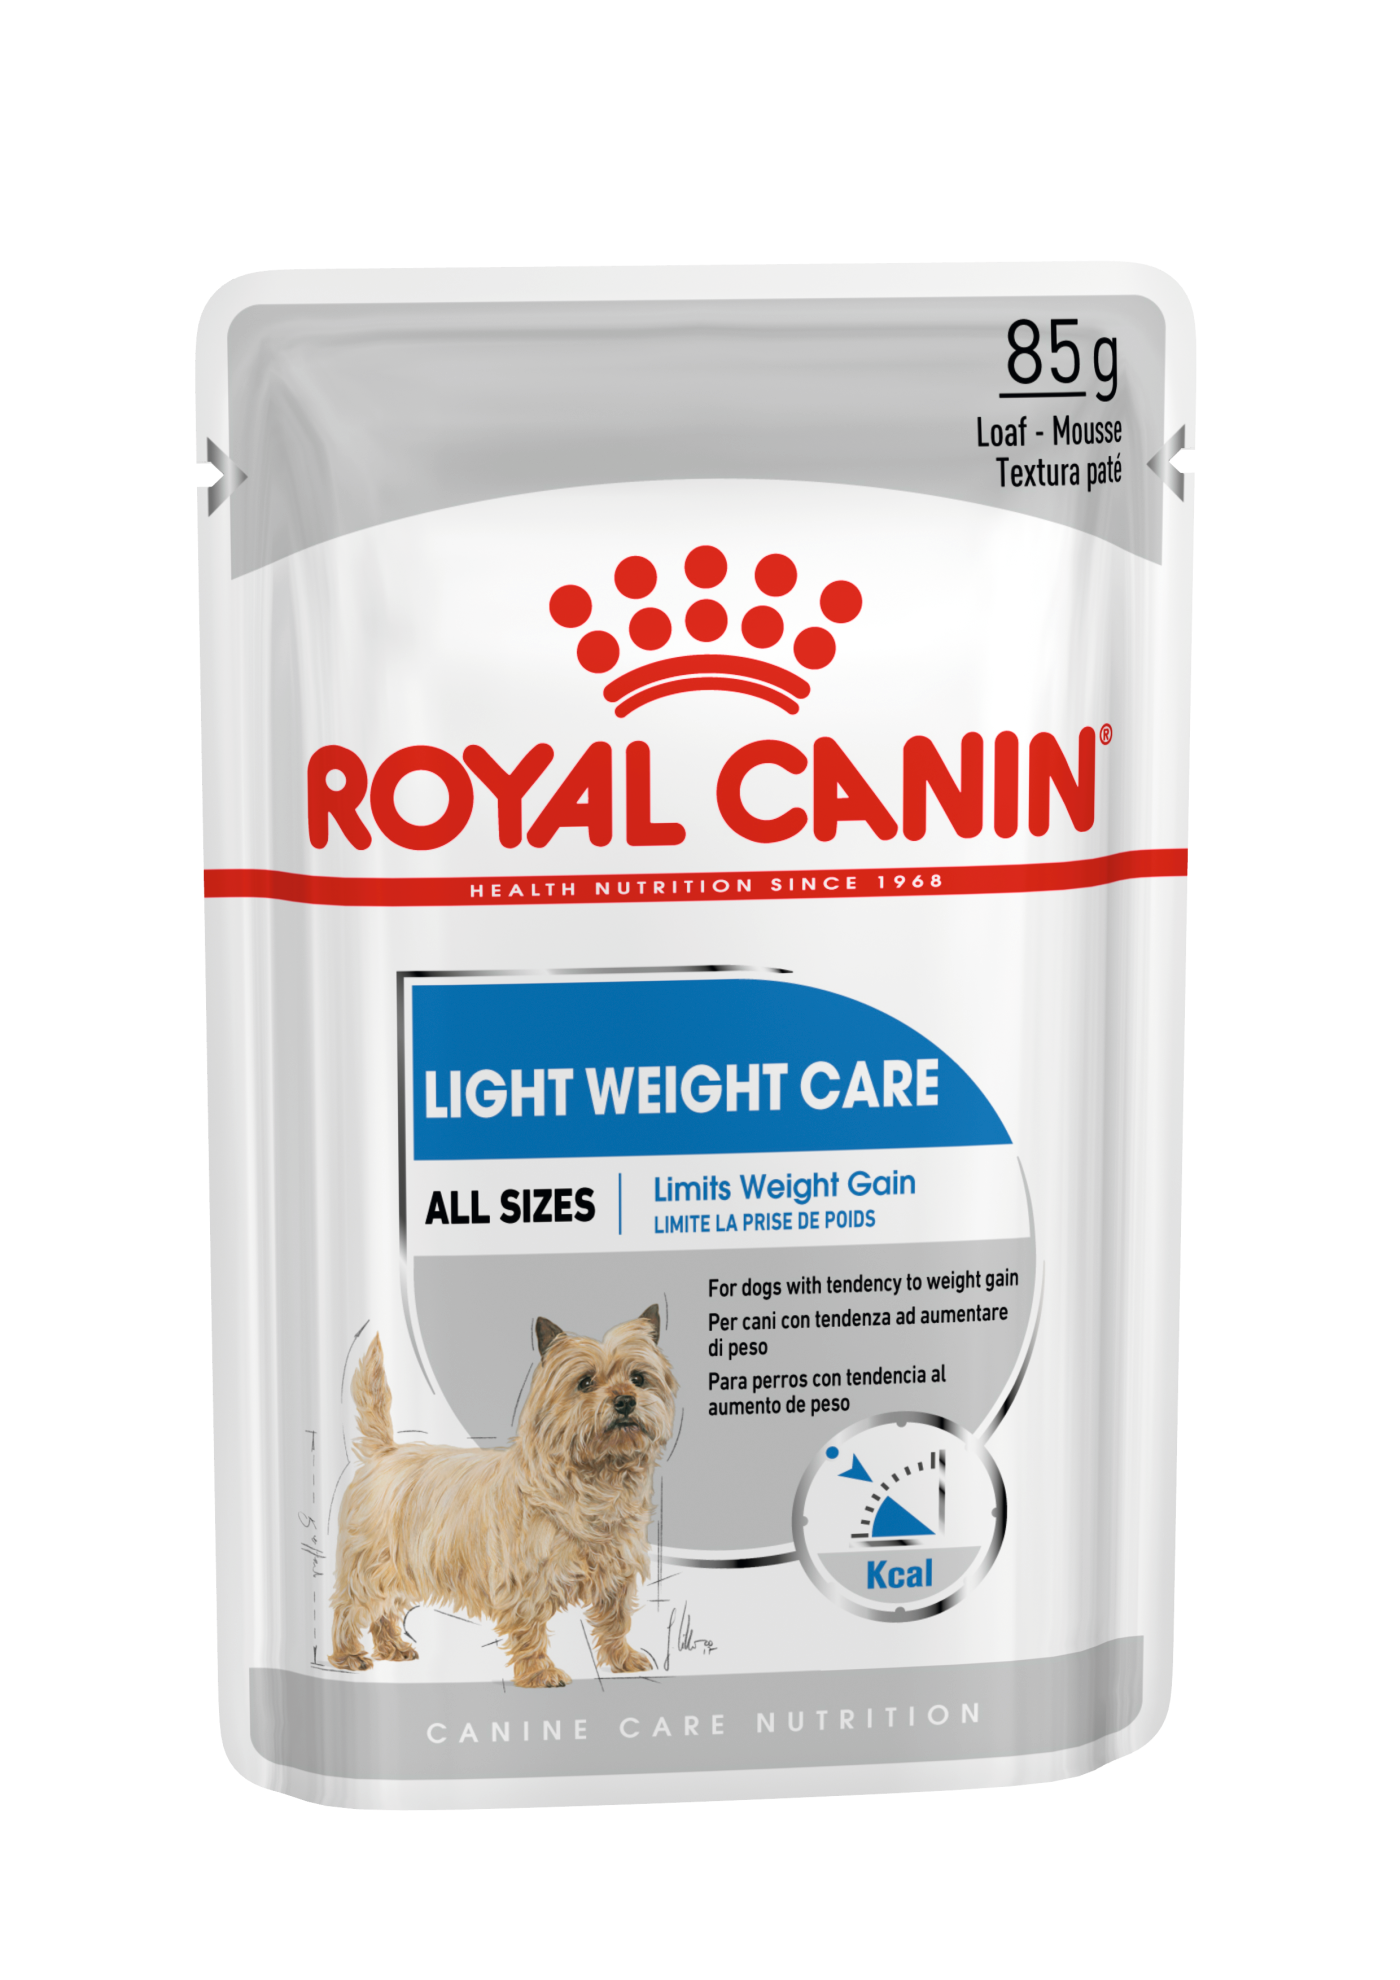 Royal Canin Light Weight Care Loaf - Box of 12